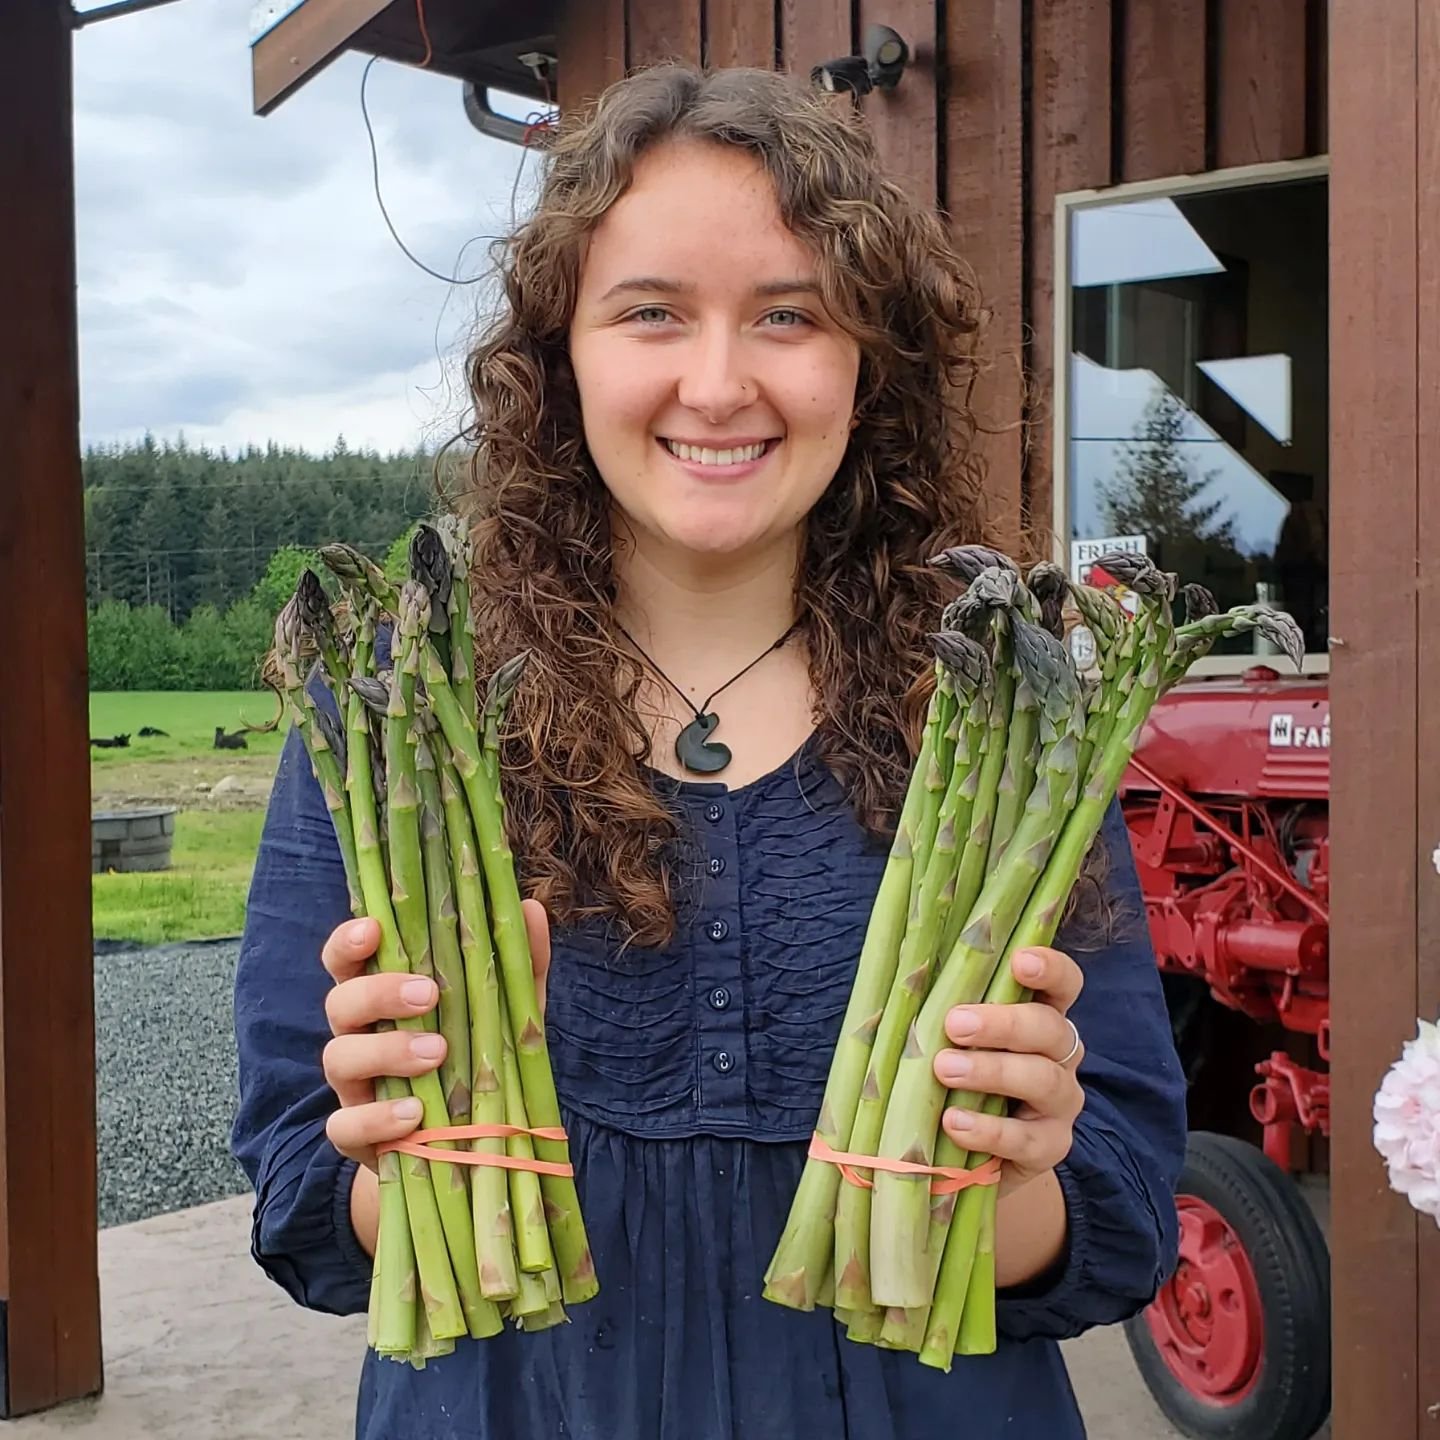 Happy Sunday!!! SURPRISE - we just received a delivery of beautiful farm fresh, organically grown asparagus from @sparrowgrass_farm in Courtenay! It was picked fresh yesterday morning and looks amazing!! 
 
We're open until 5pm today - drop by to pic